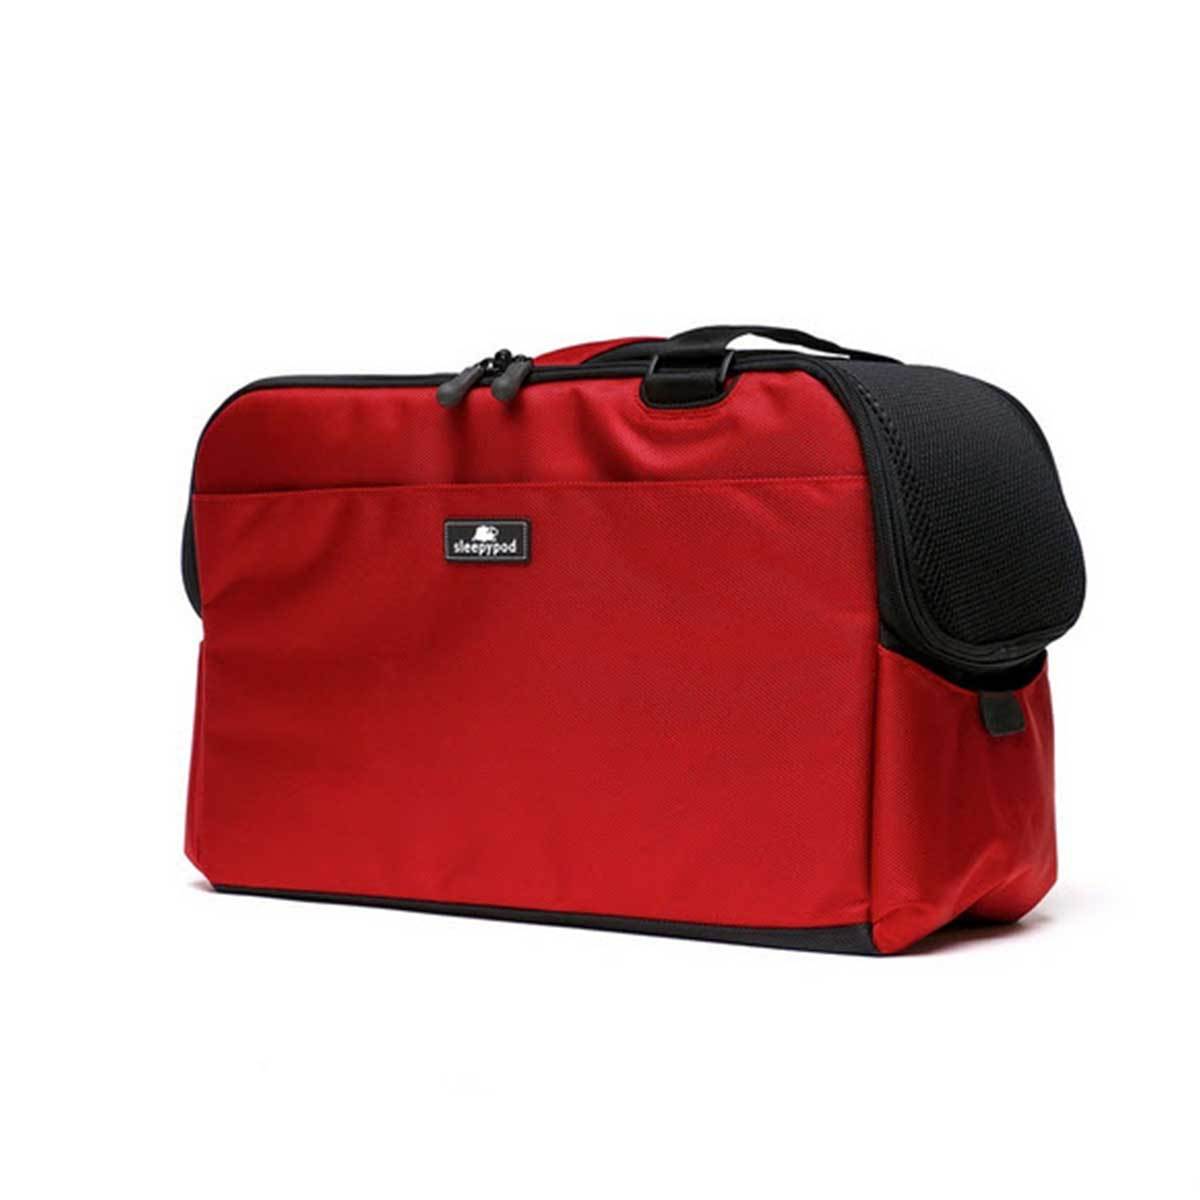 Sleepypod Atom Pet Carrier in Strawberry Red | Pawlicious & Company